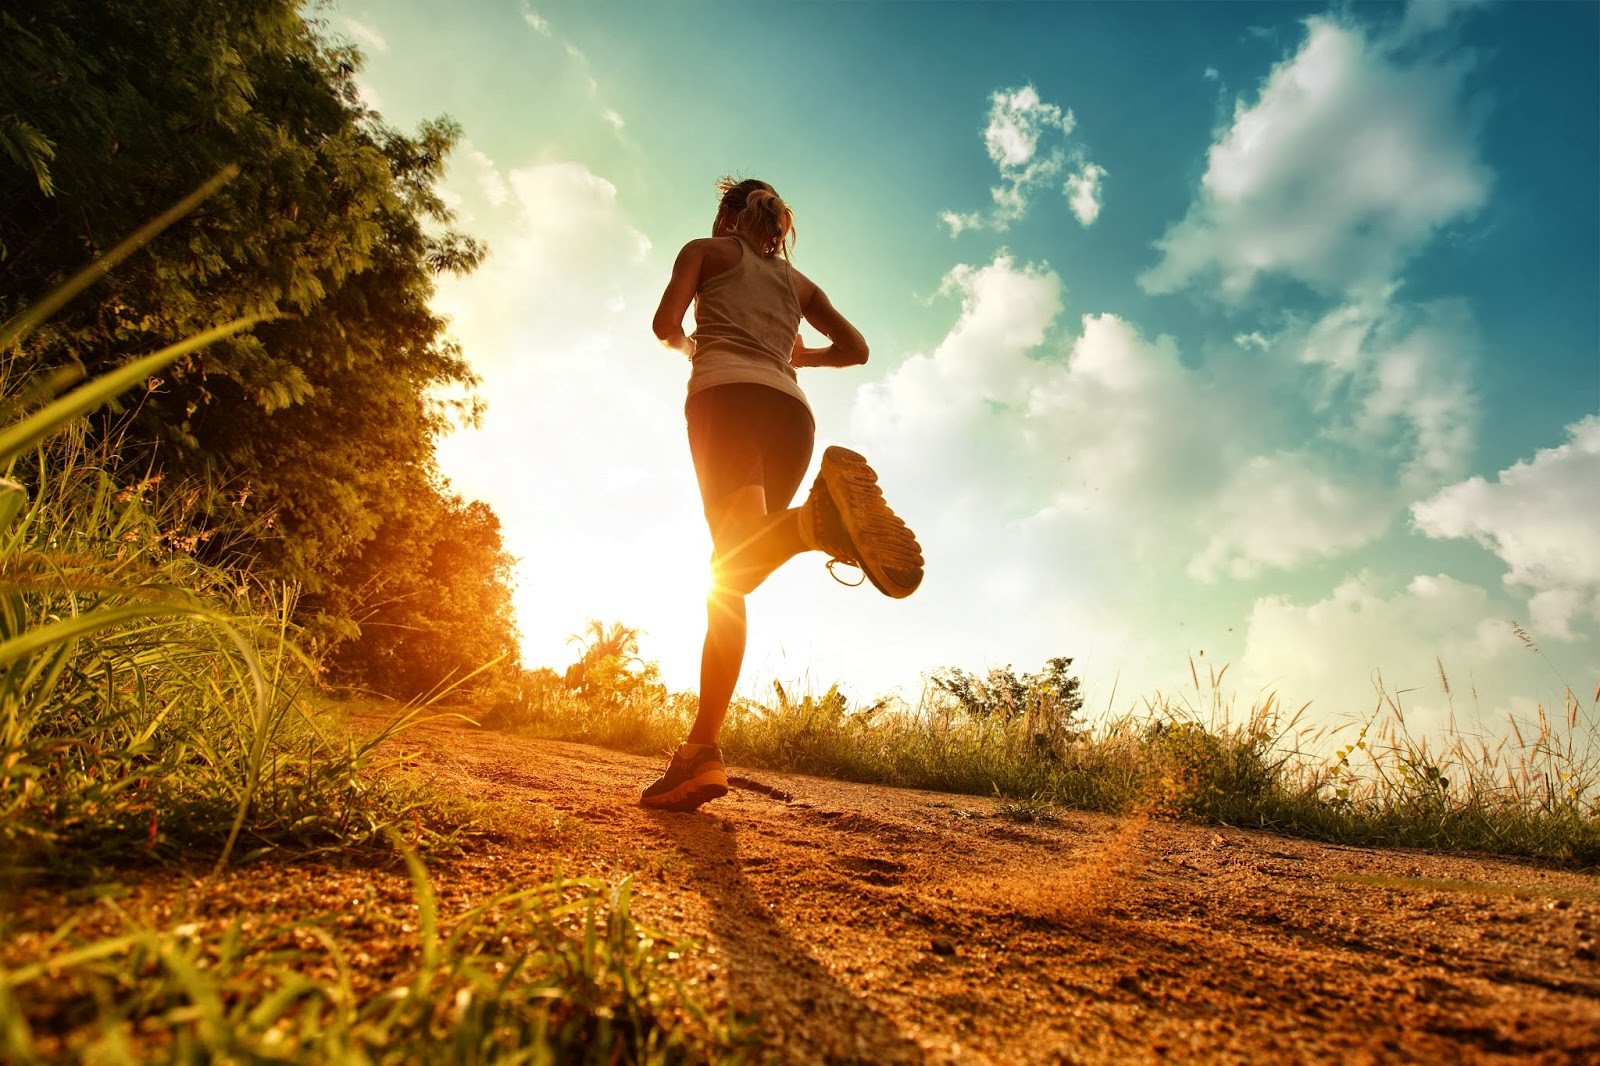 Running can help you combat forgetfulness